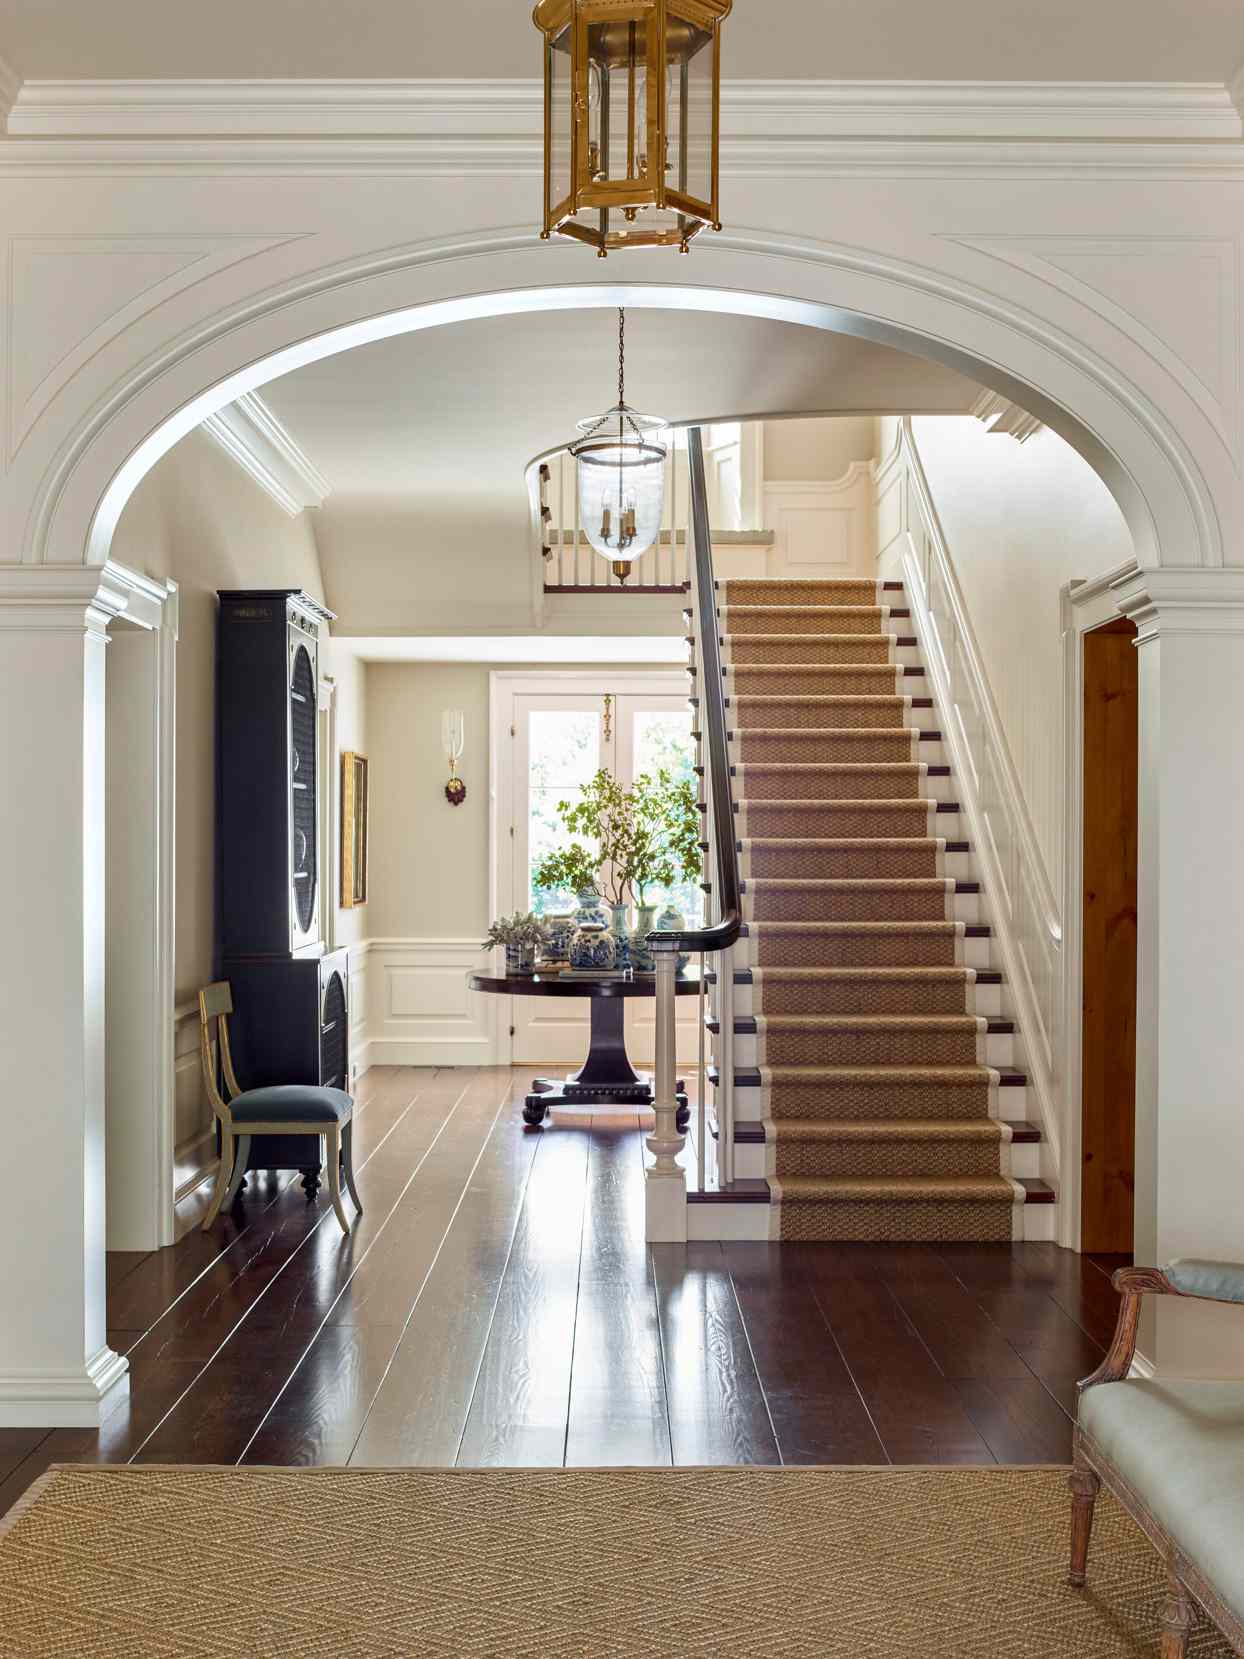 georgian-style rounded archway foyer